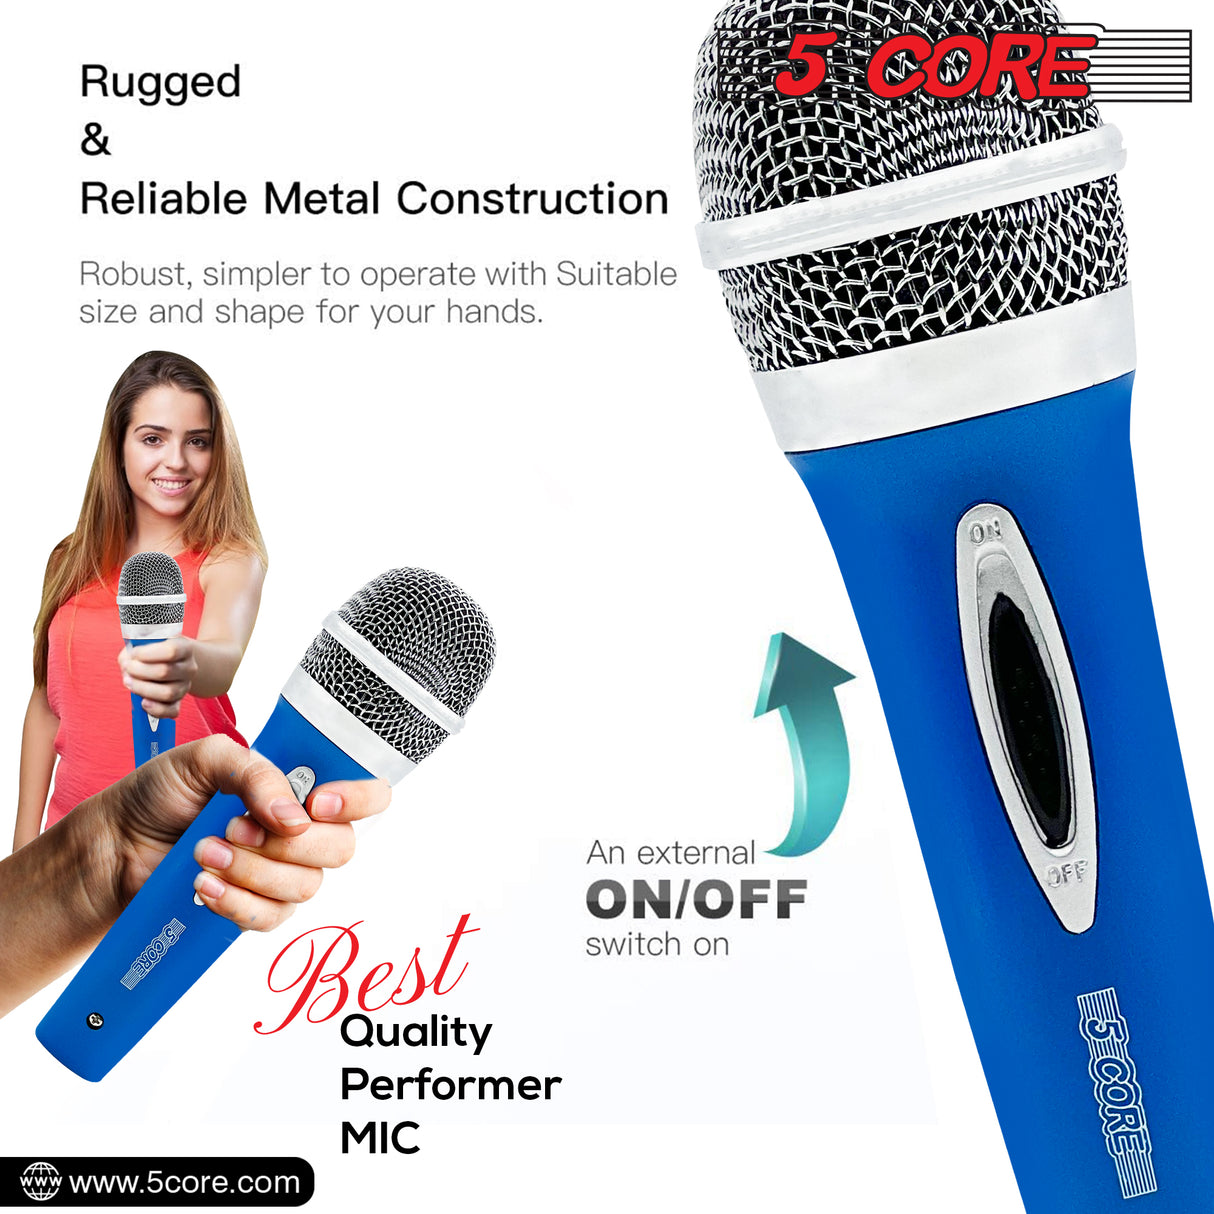 5 CORE Premium Vocal Dynamic Cardioid Handheld Microphone Unidirectional Mic with 12ft Detachable XLR Cable to ¼ inch Audio Jack and On/Off Switch for Karaoke Singing (Blue) PM 286 BLU